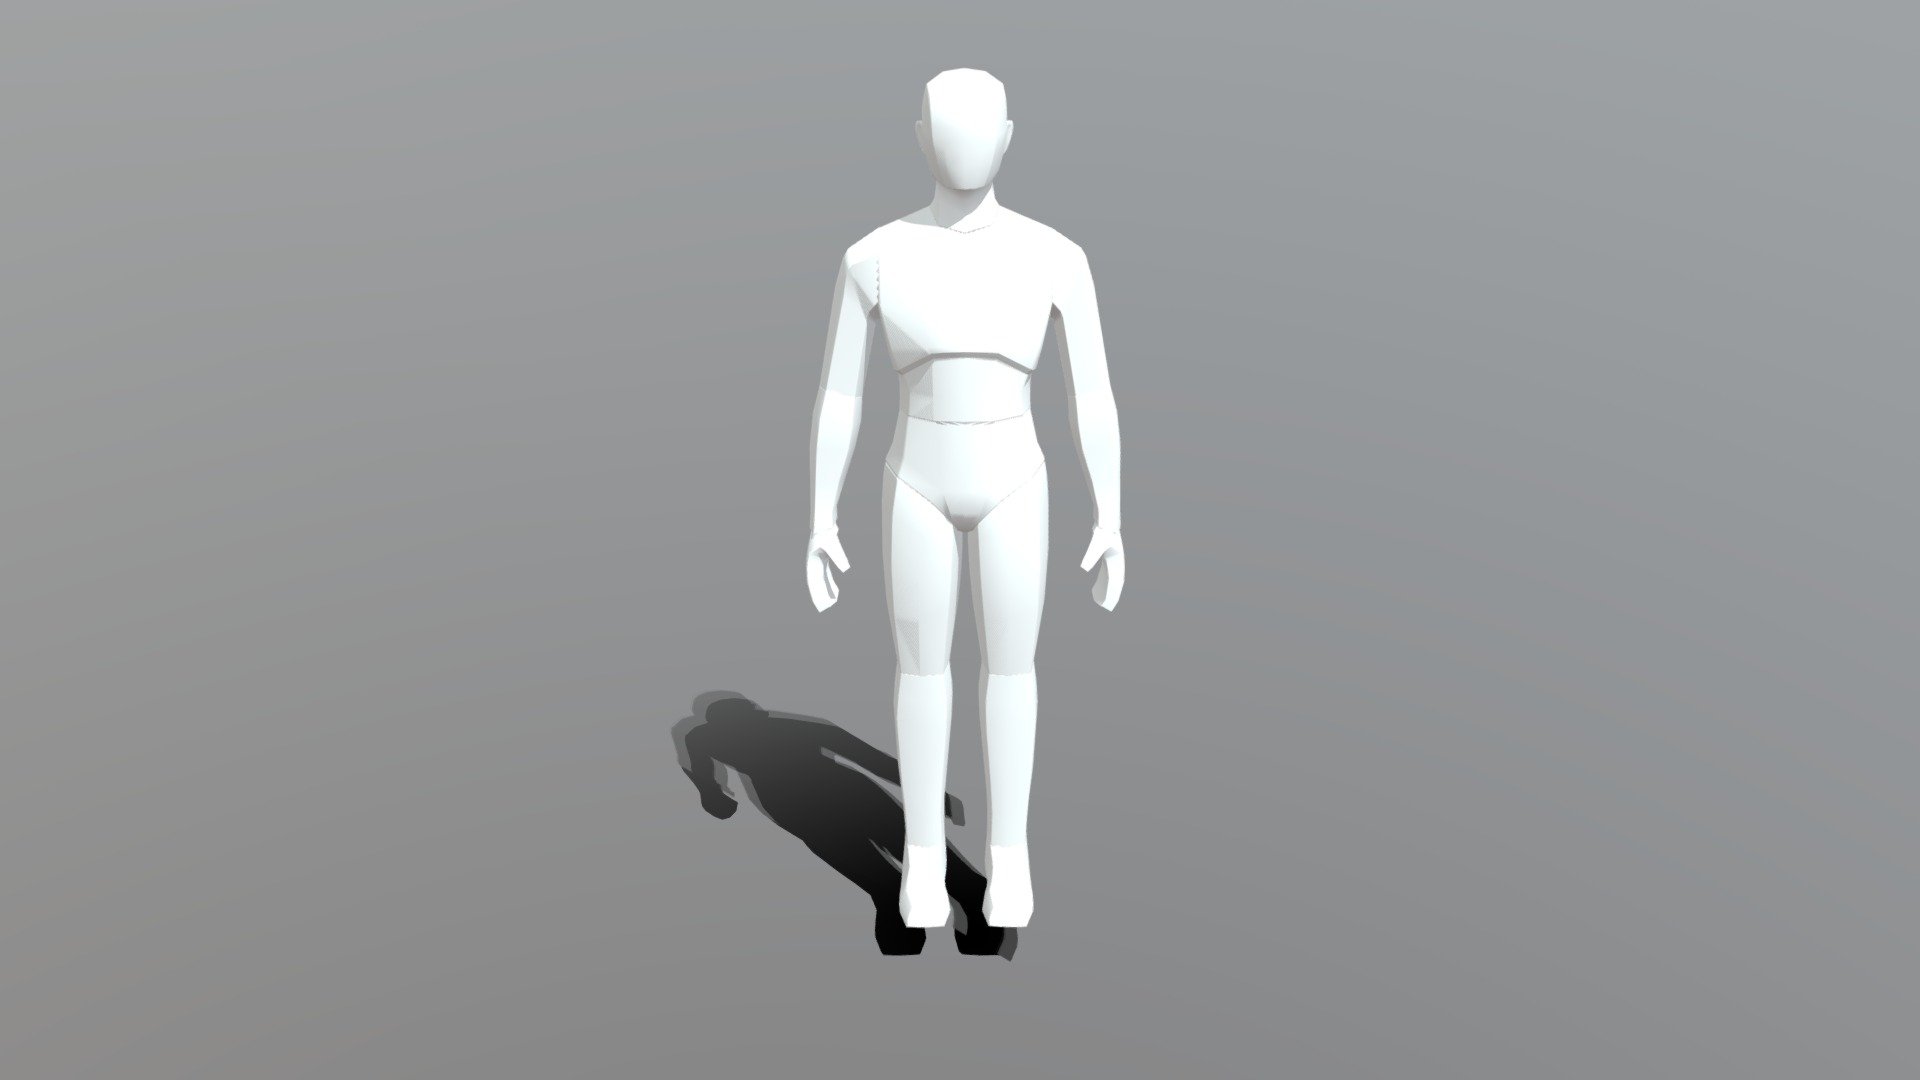 A dummy rigged with bones, auto-rigged with MIXAMO.

https://www.mixamo.com/#/

Please credit me if used for business or anything publicly released 3d model